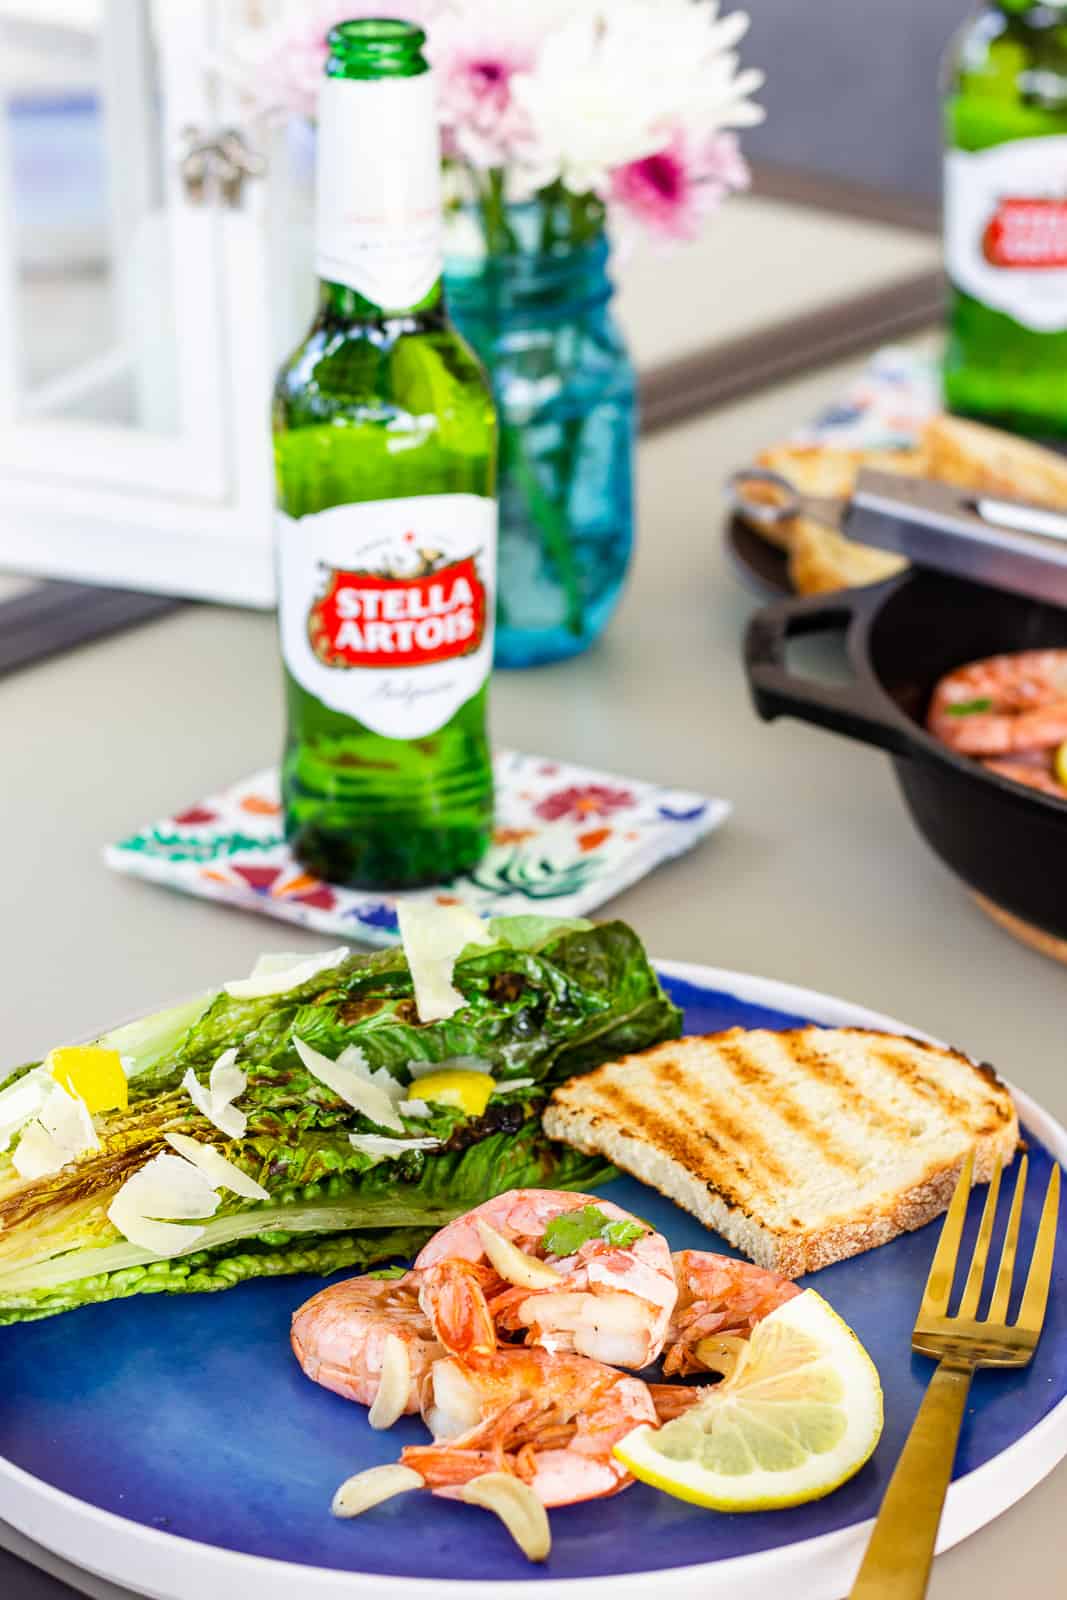 Blue plate with shrimp, slice of grilled bread, halved grilled romaine, and a bottle of Stella Artois Beer.